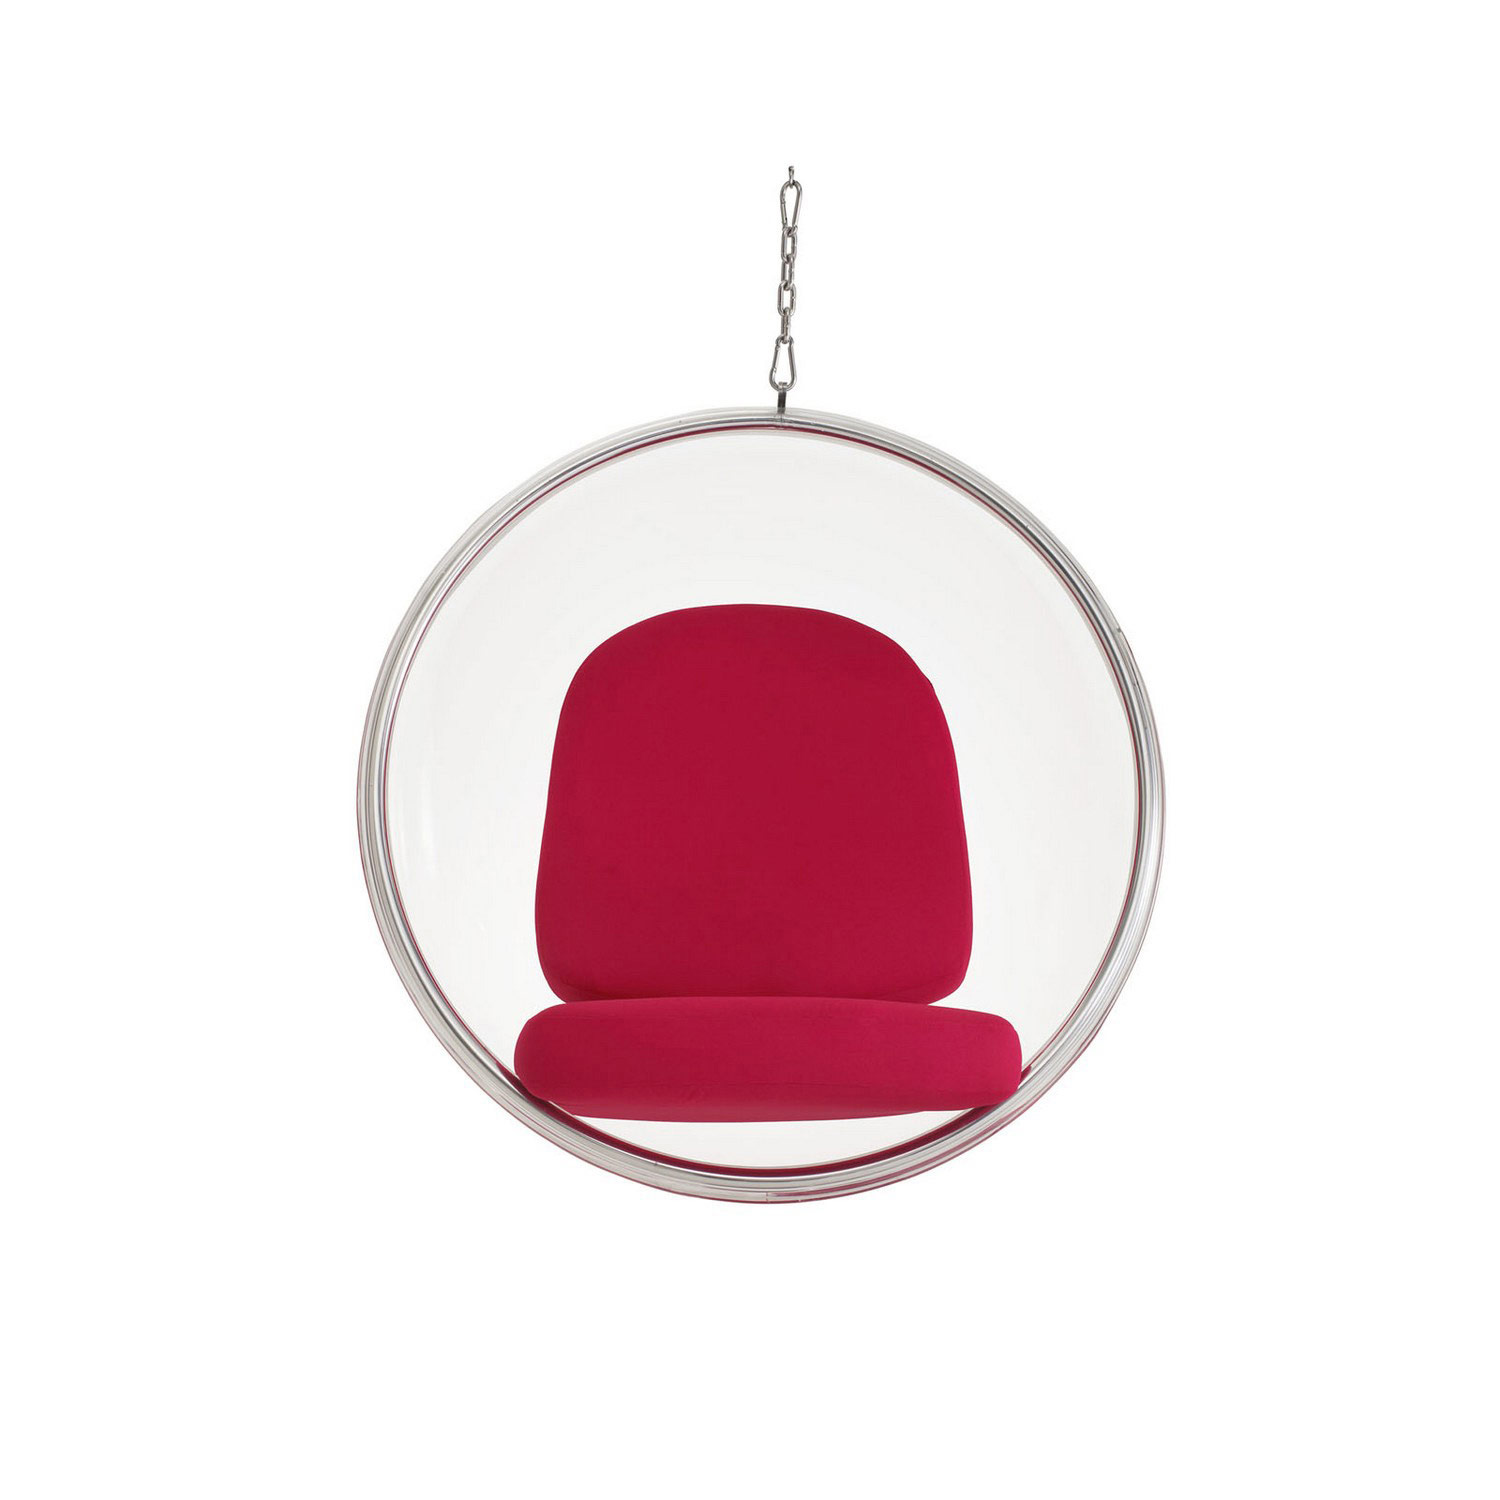 Modway Ring Lounge Chair - Red